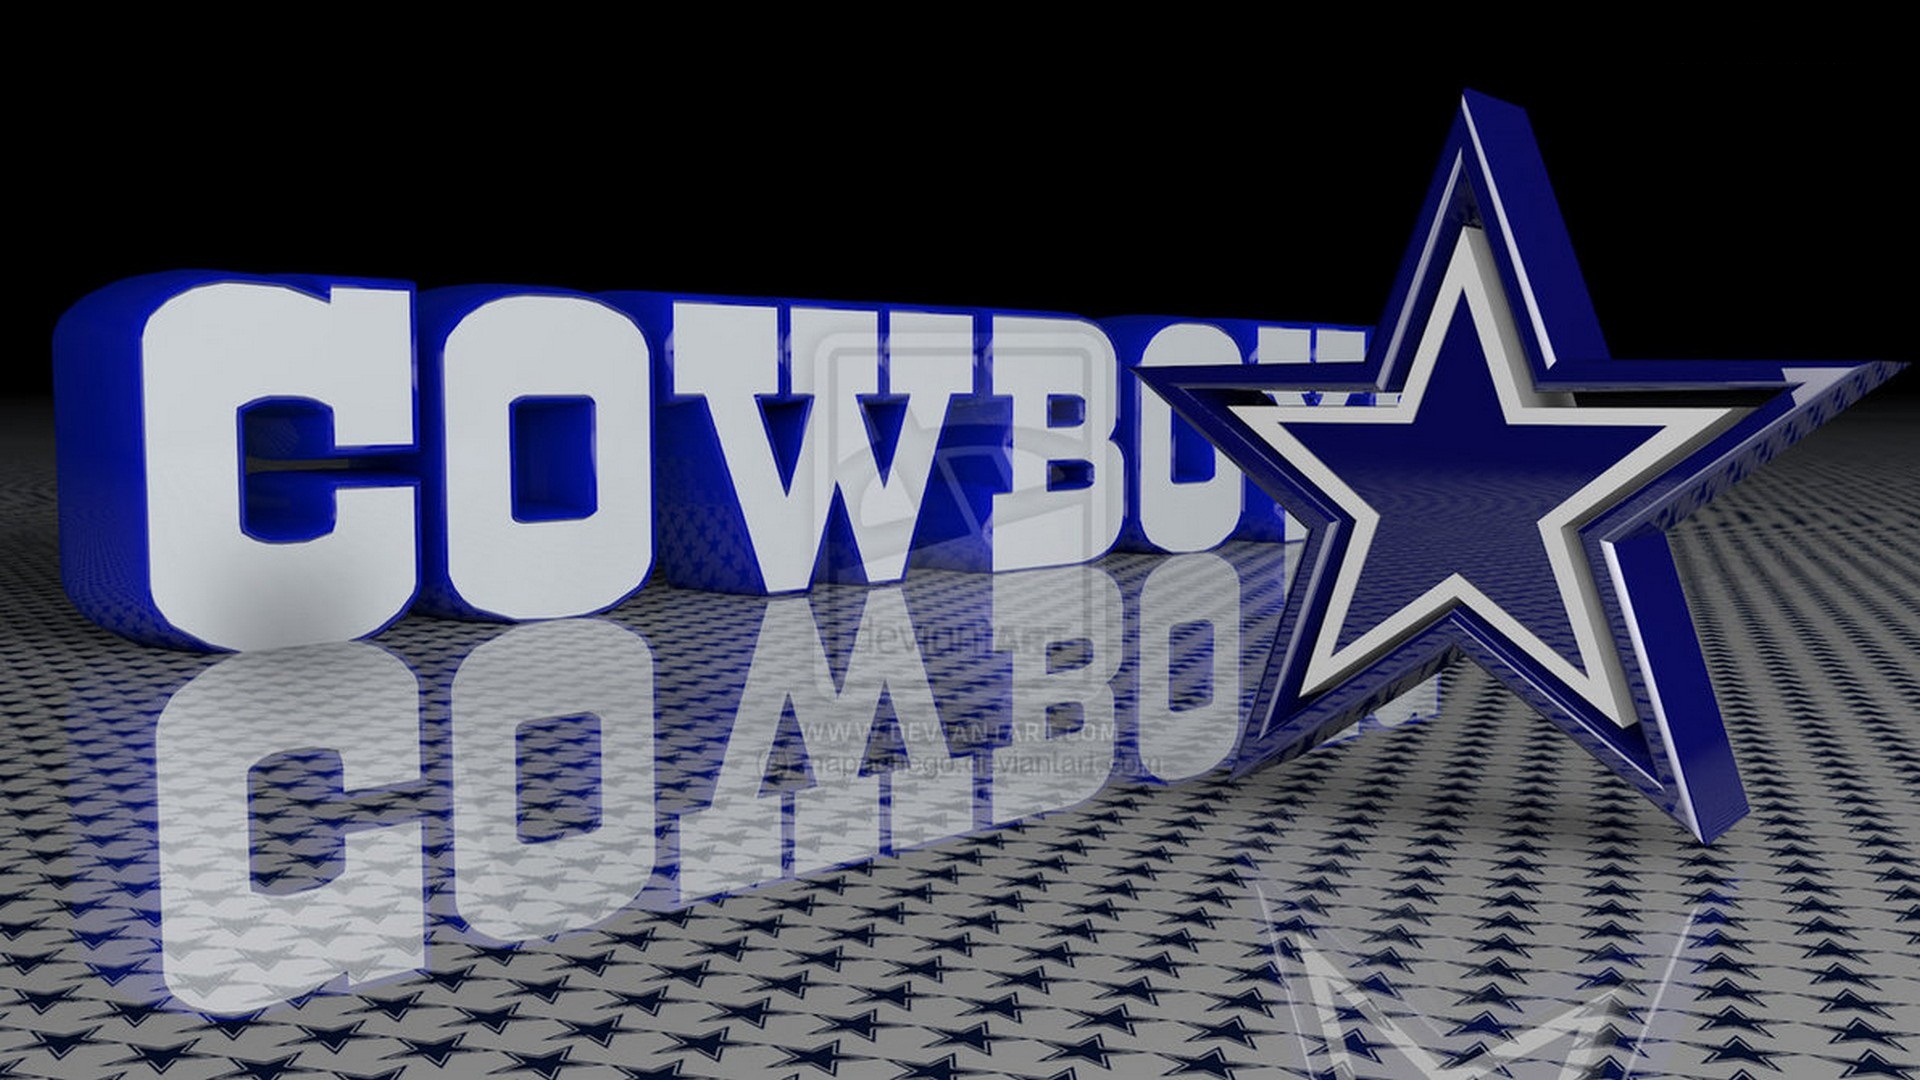 Dallas Cowboys Backgrounds HD With Resolution 1920X1080